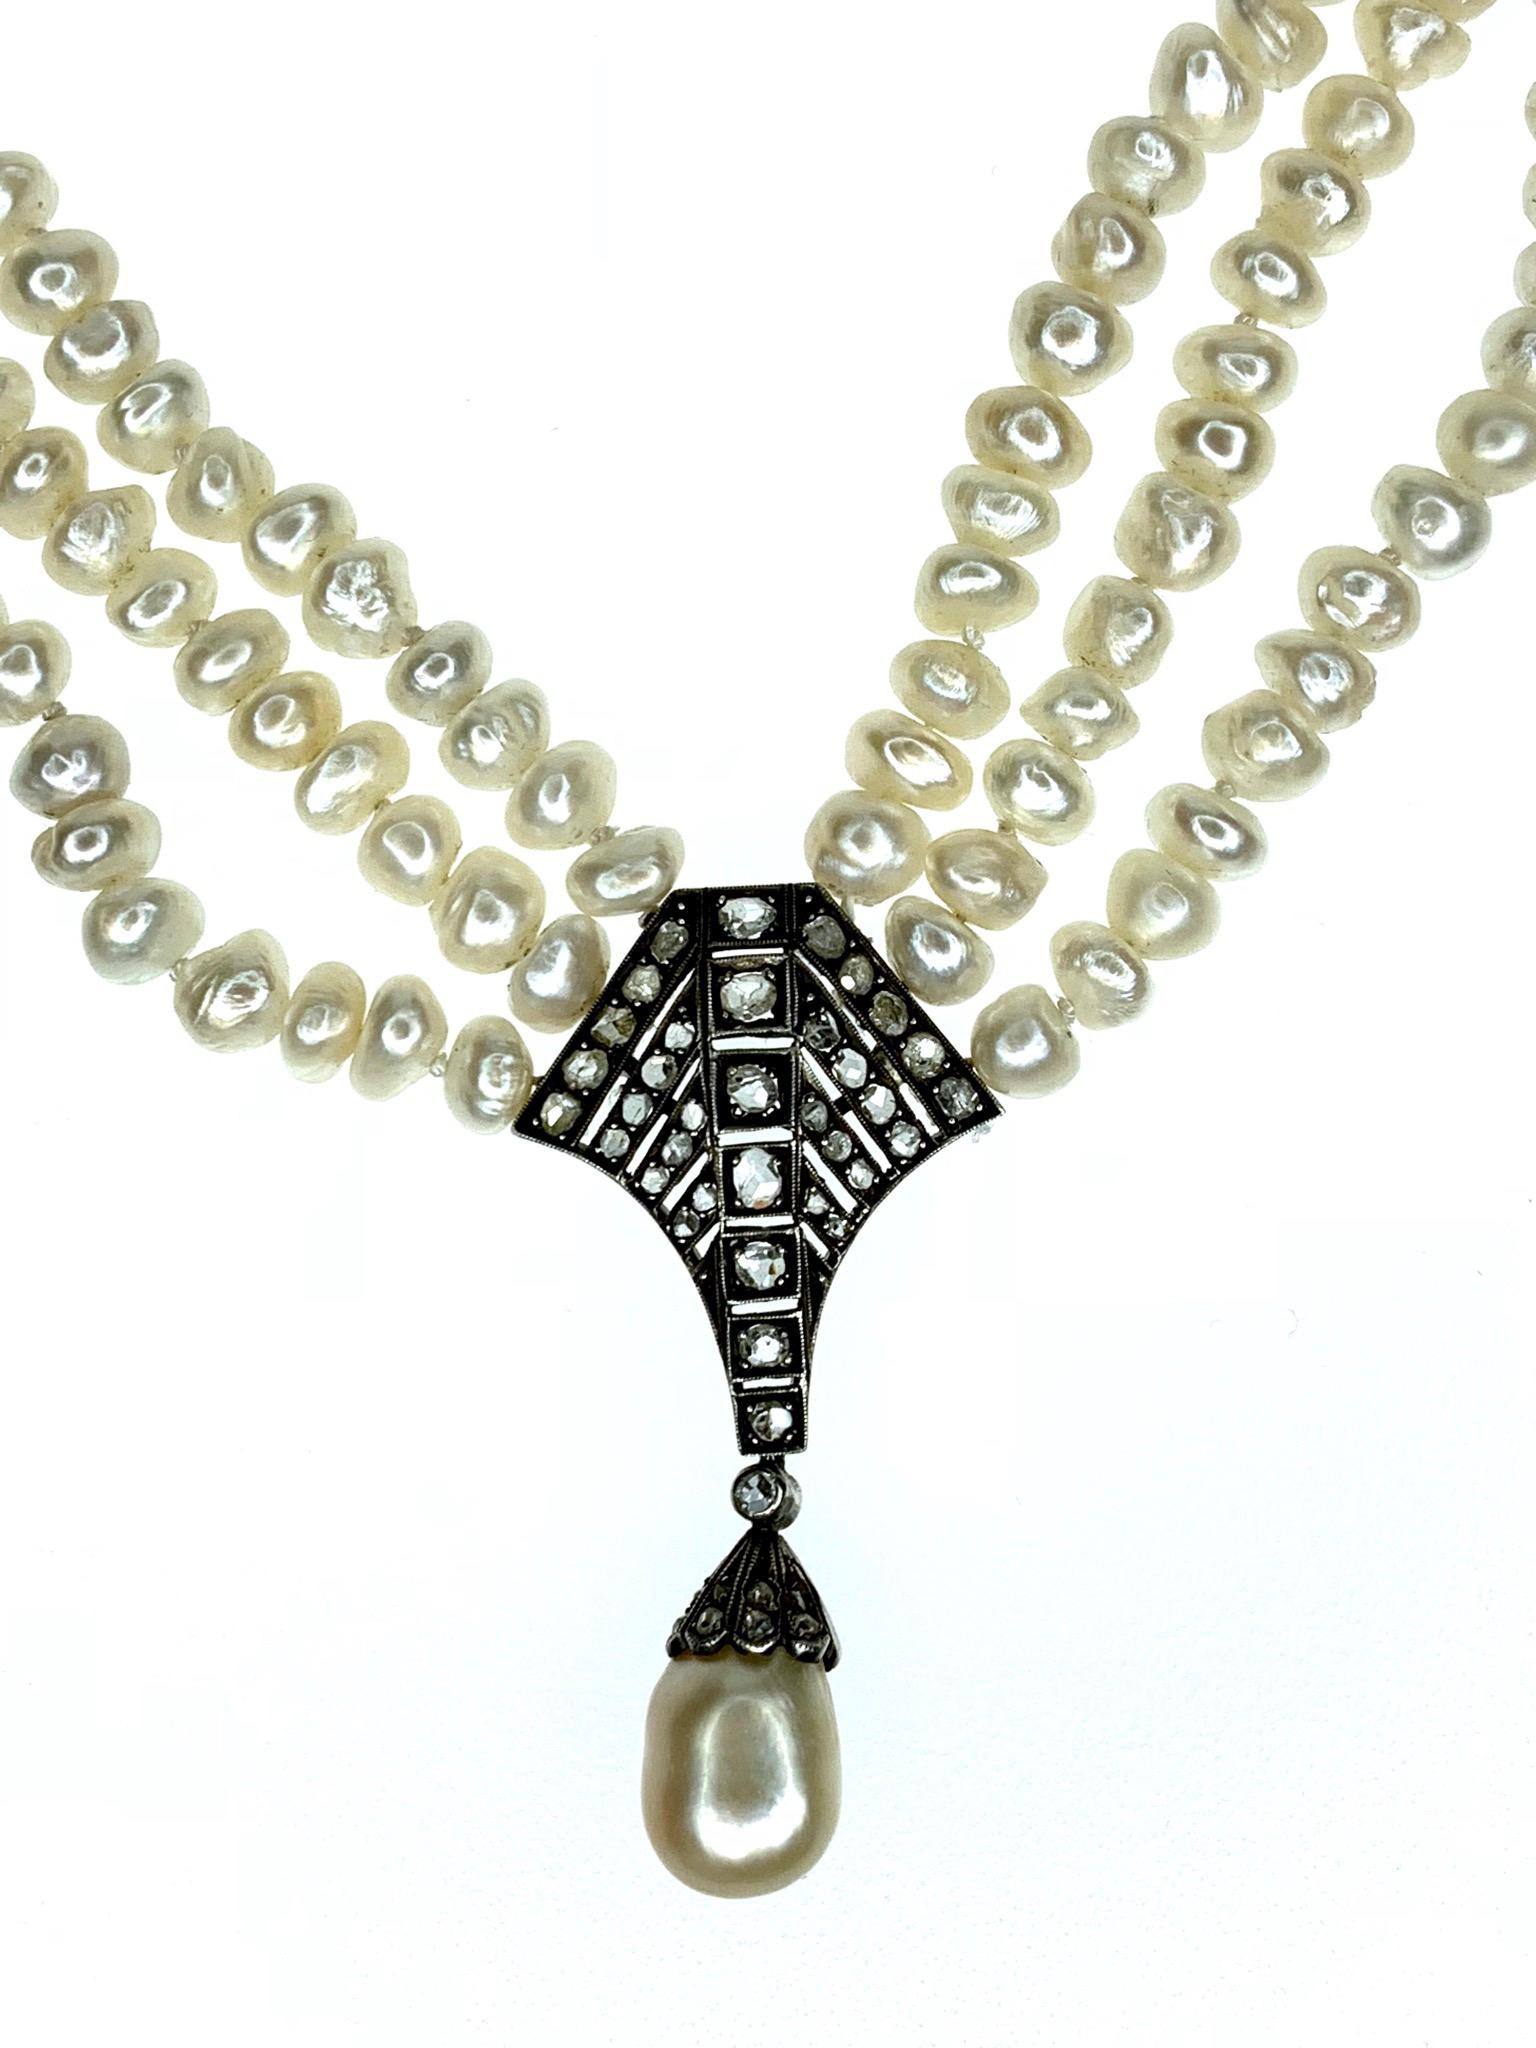 Antique Natural Pearl & Diamond Necklace 19th Century. Bashra pearls Certified all natural 